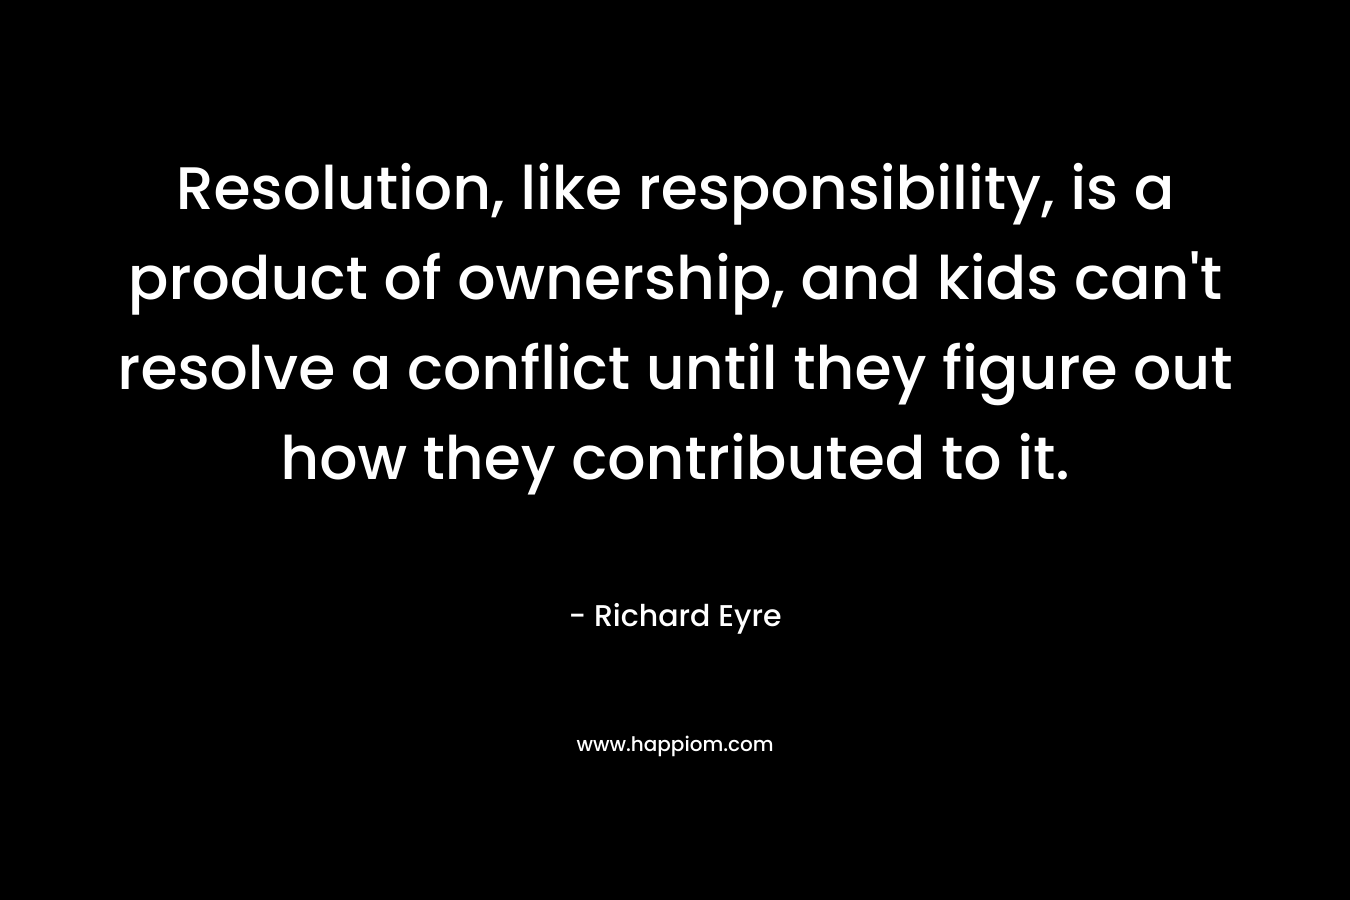 Resolution, like responsibility, is a product of ownership, and kids can’t resolve a conflict until they figure out how they contributed to it. – Richard Eyre